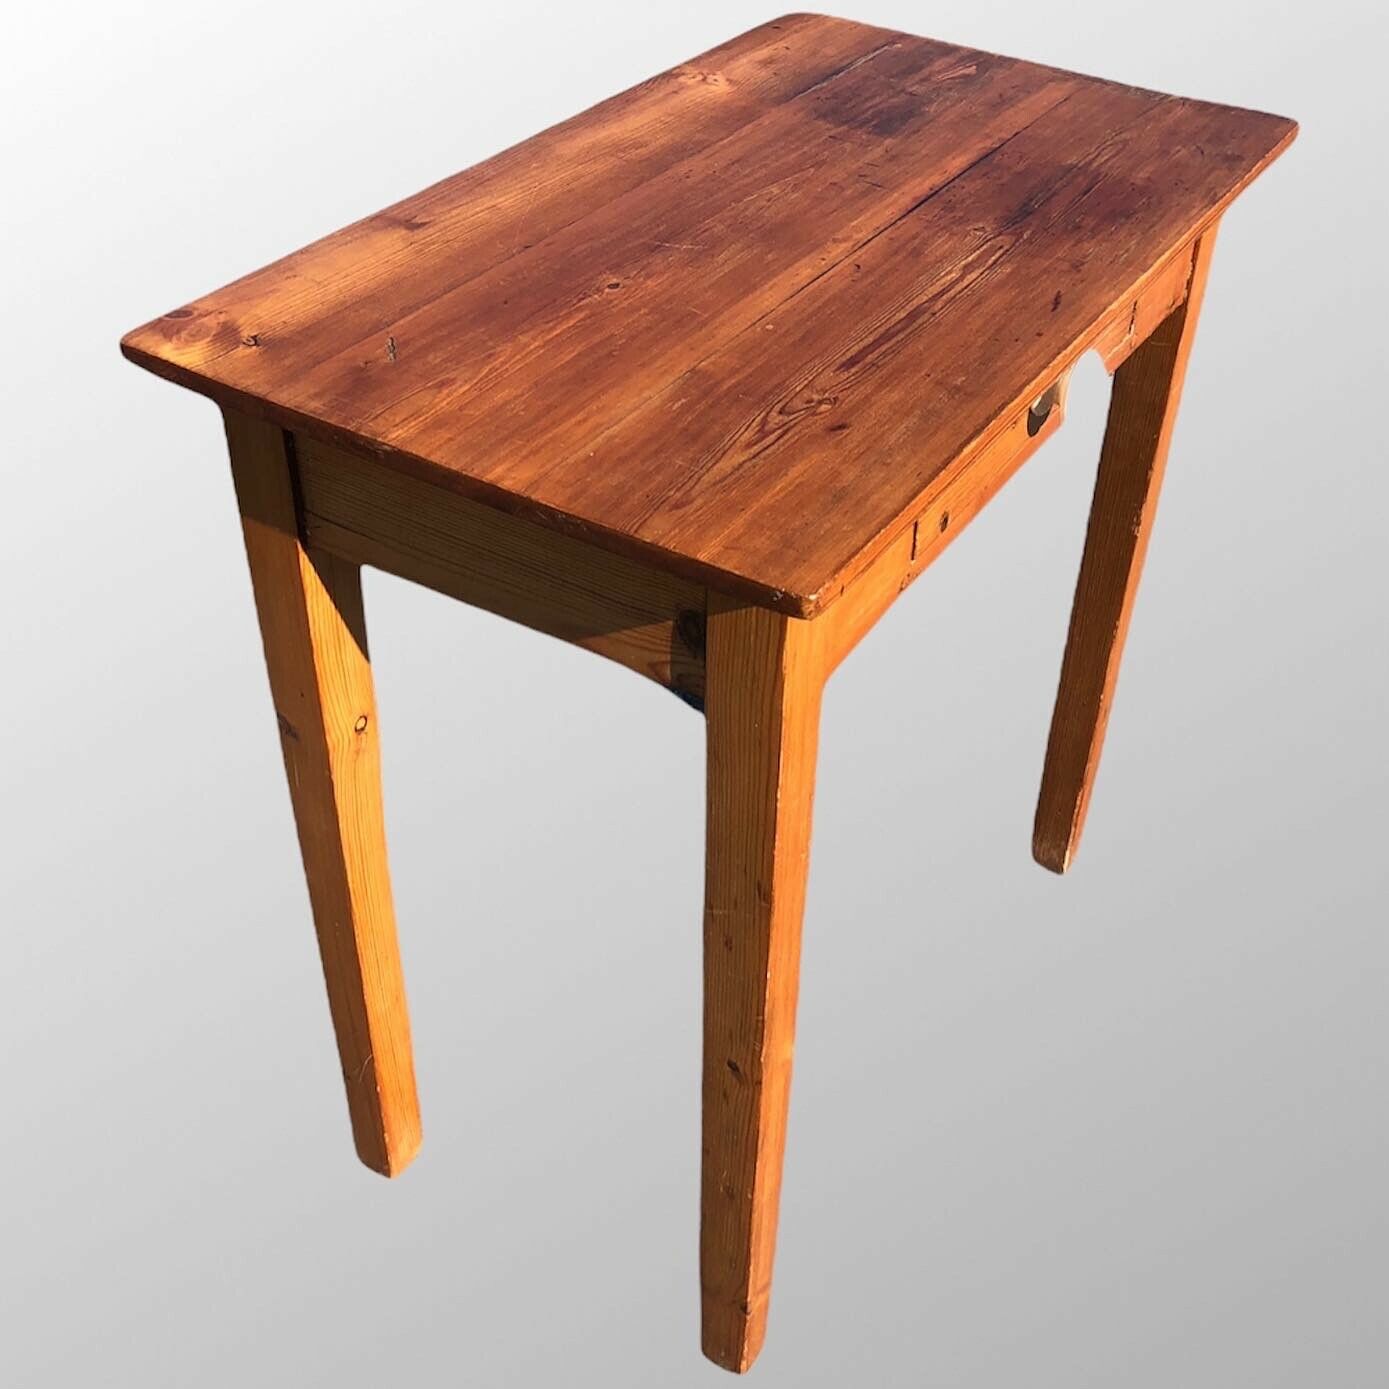 Vintage Pine Table With Drawer ( SOLD )